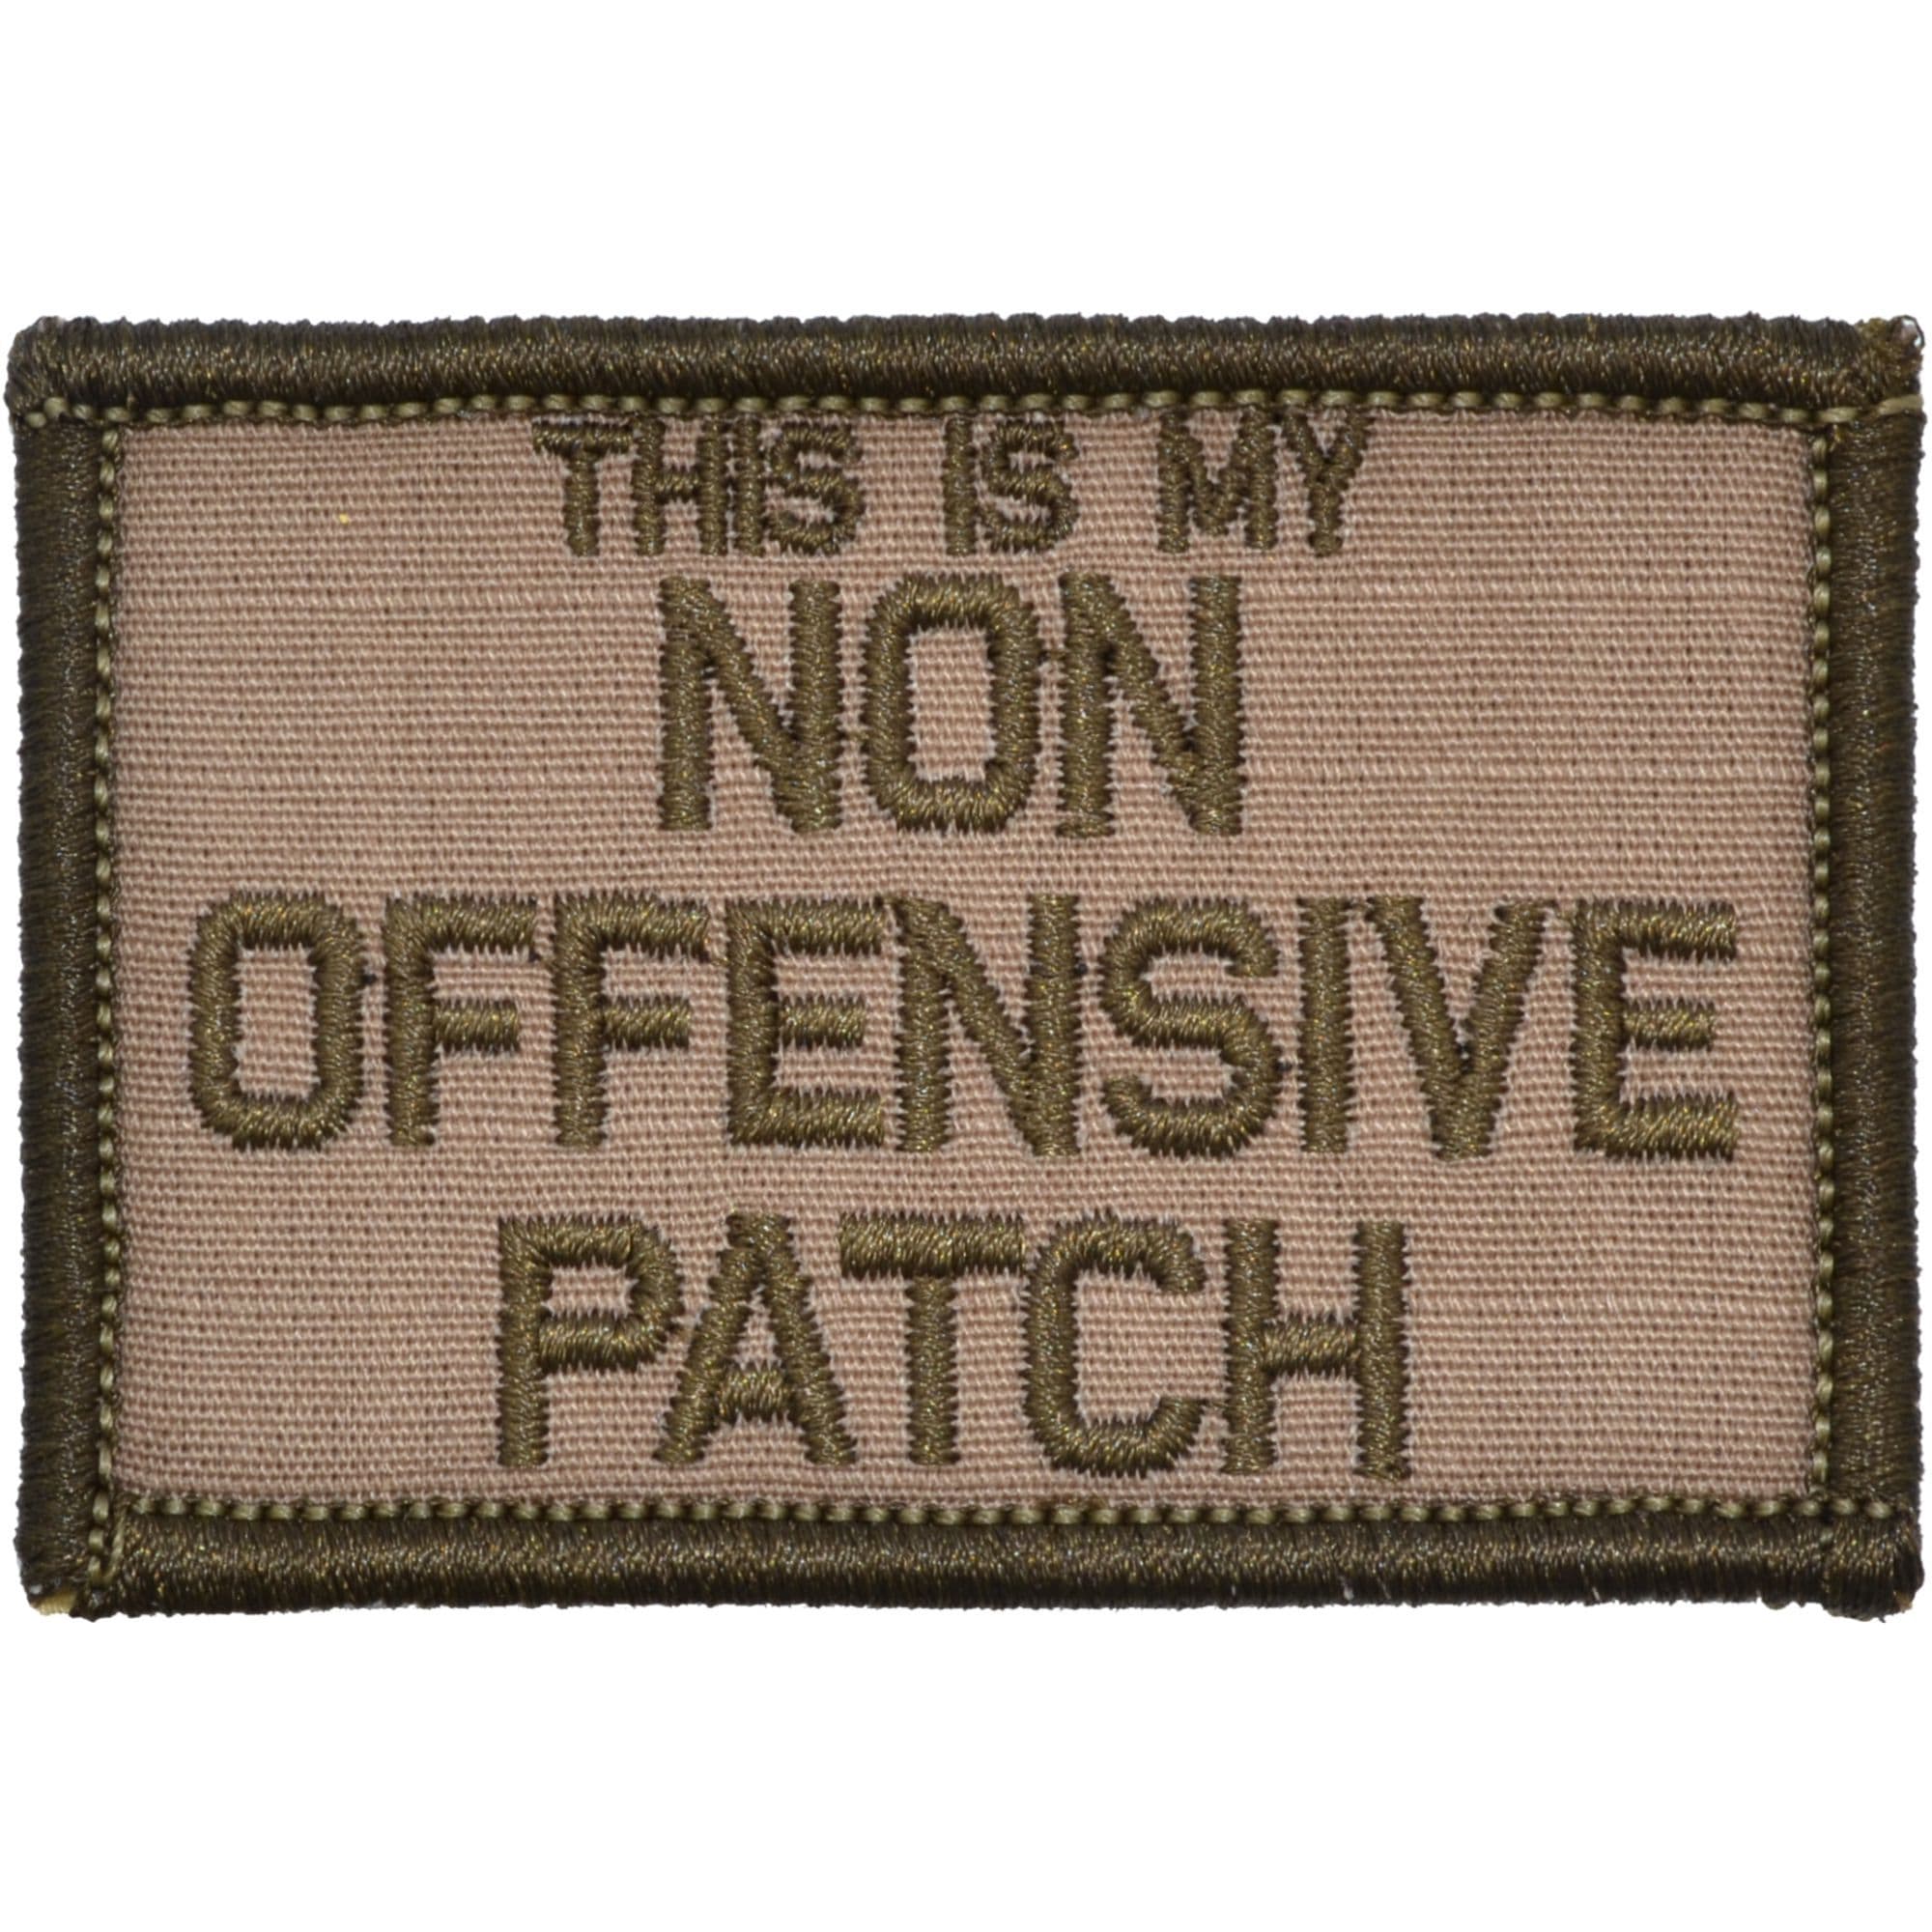 Ouch Pouch - 2x3 Patch Olive Drab | Tactical Gear Junkie